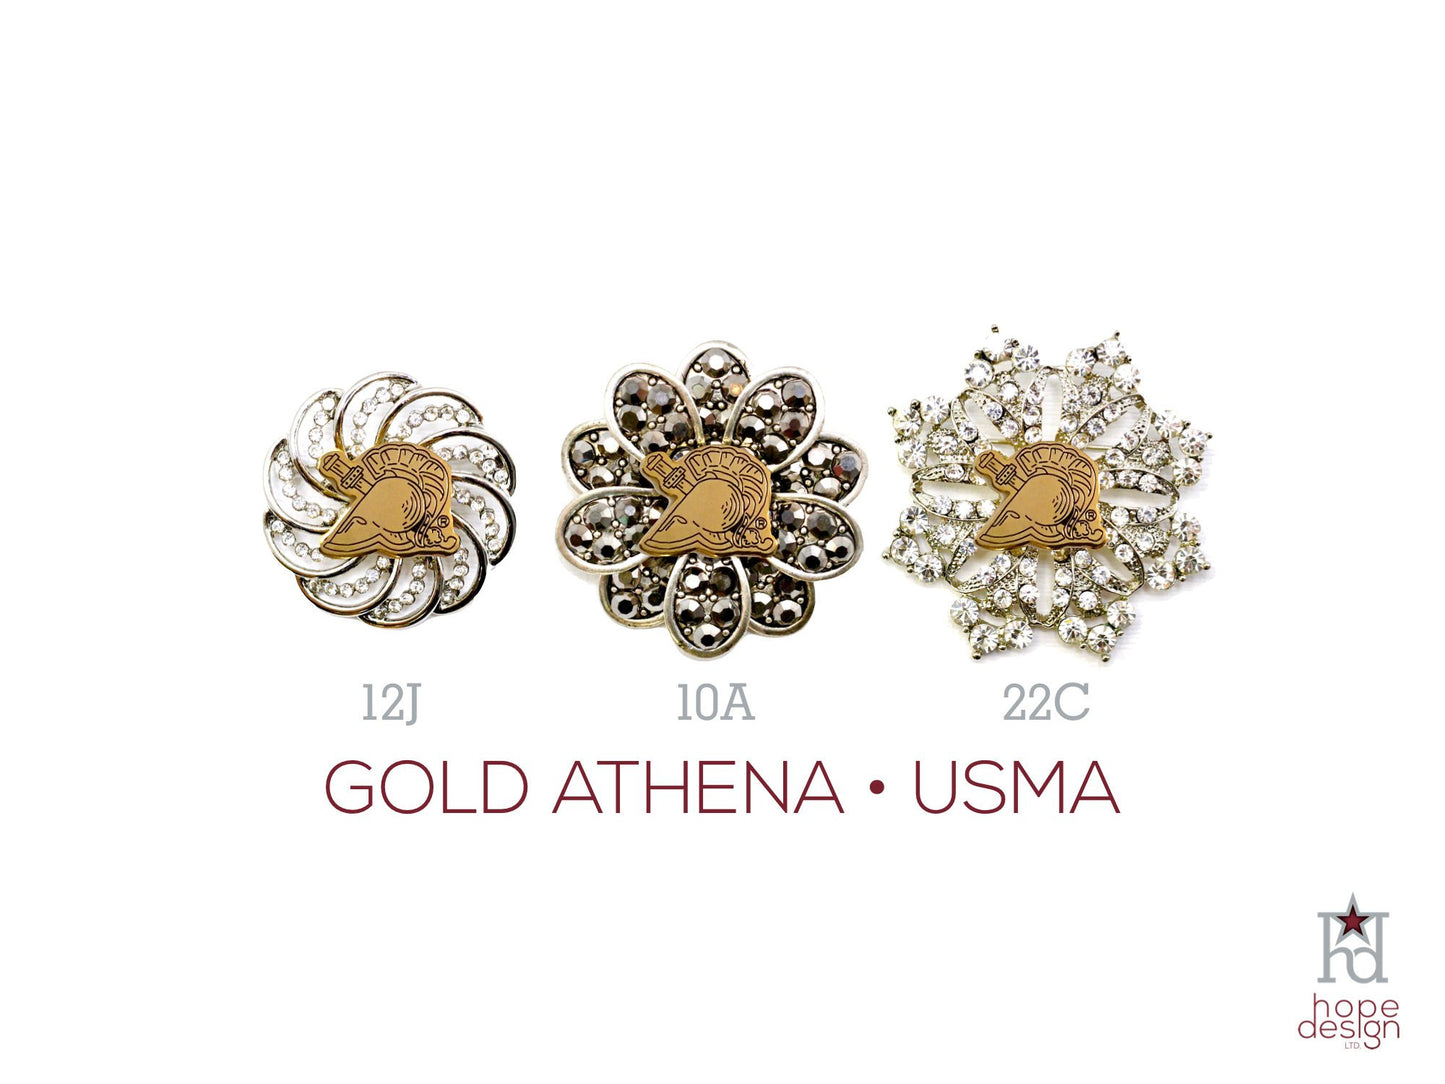 West Point Athena Gold Brooch